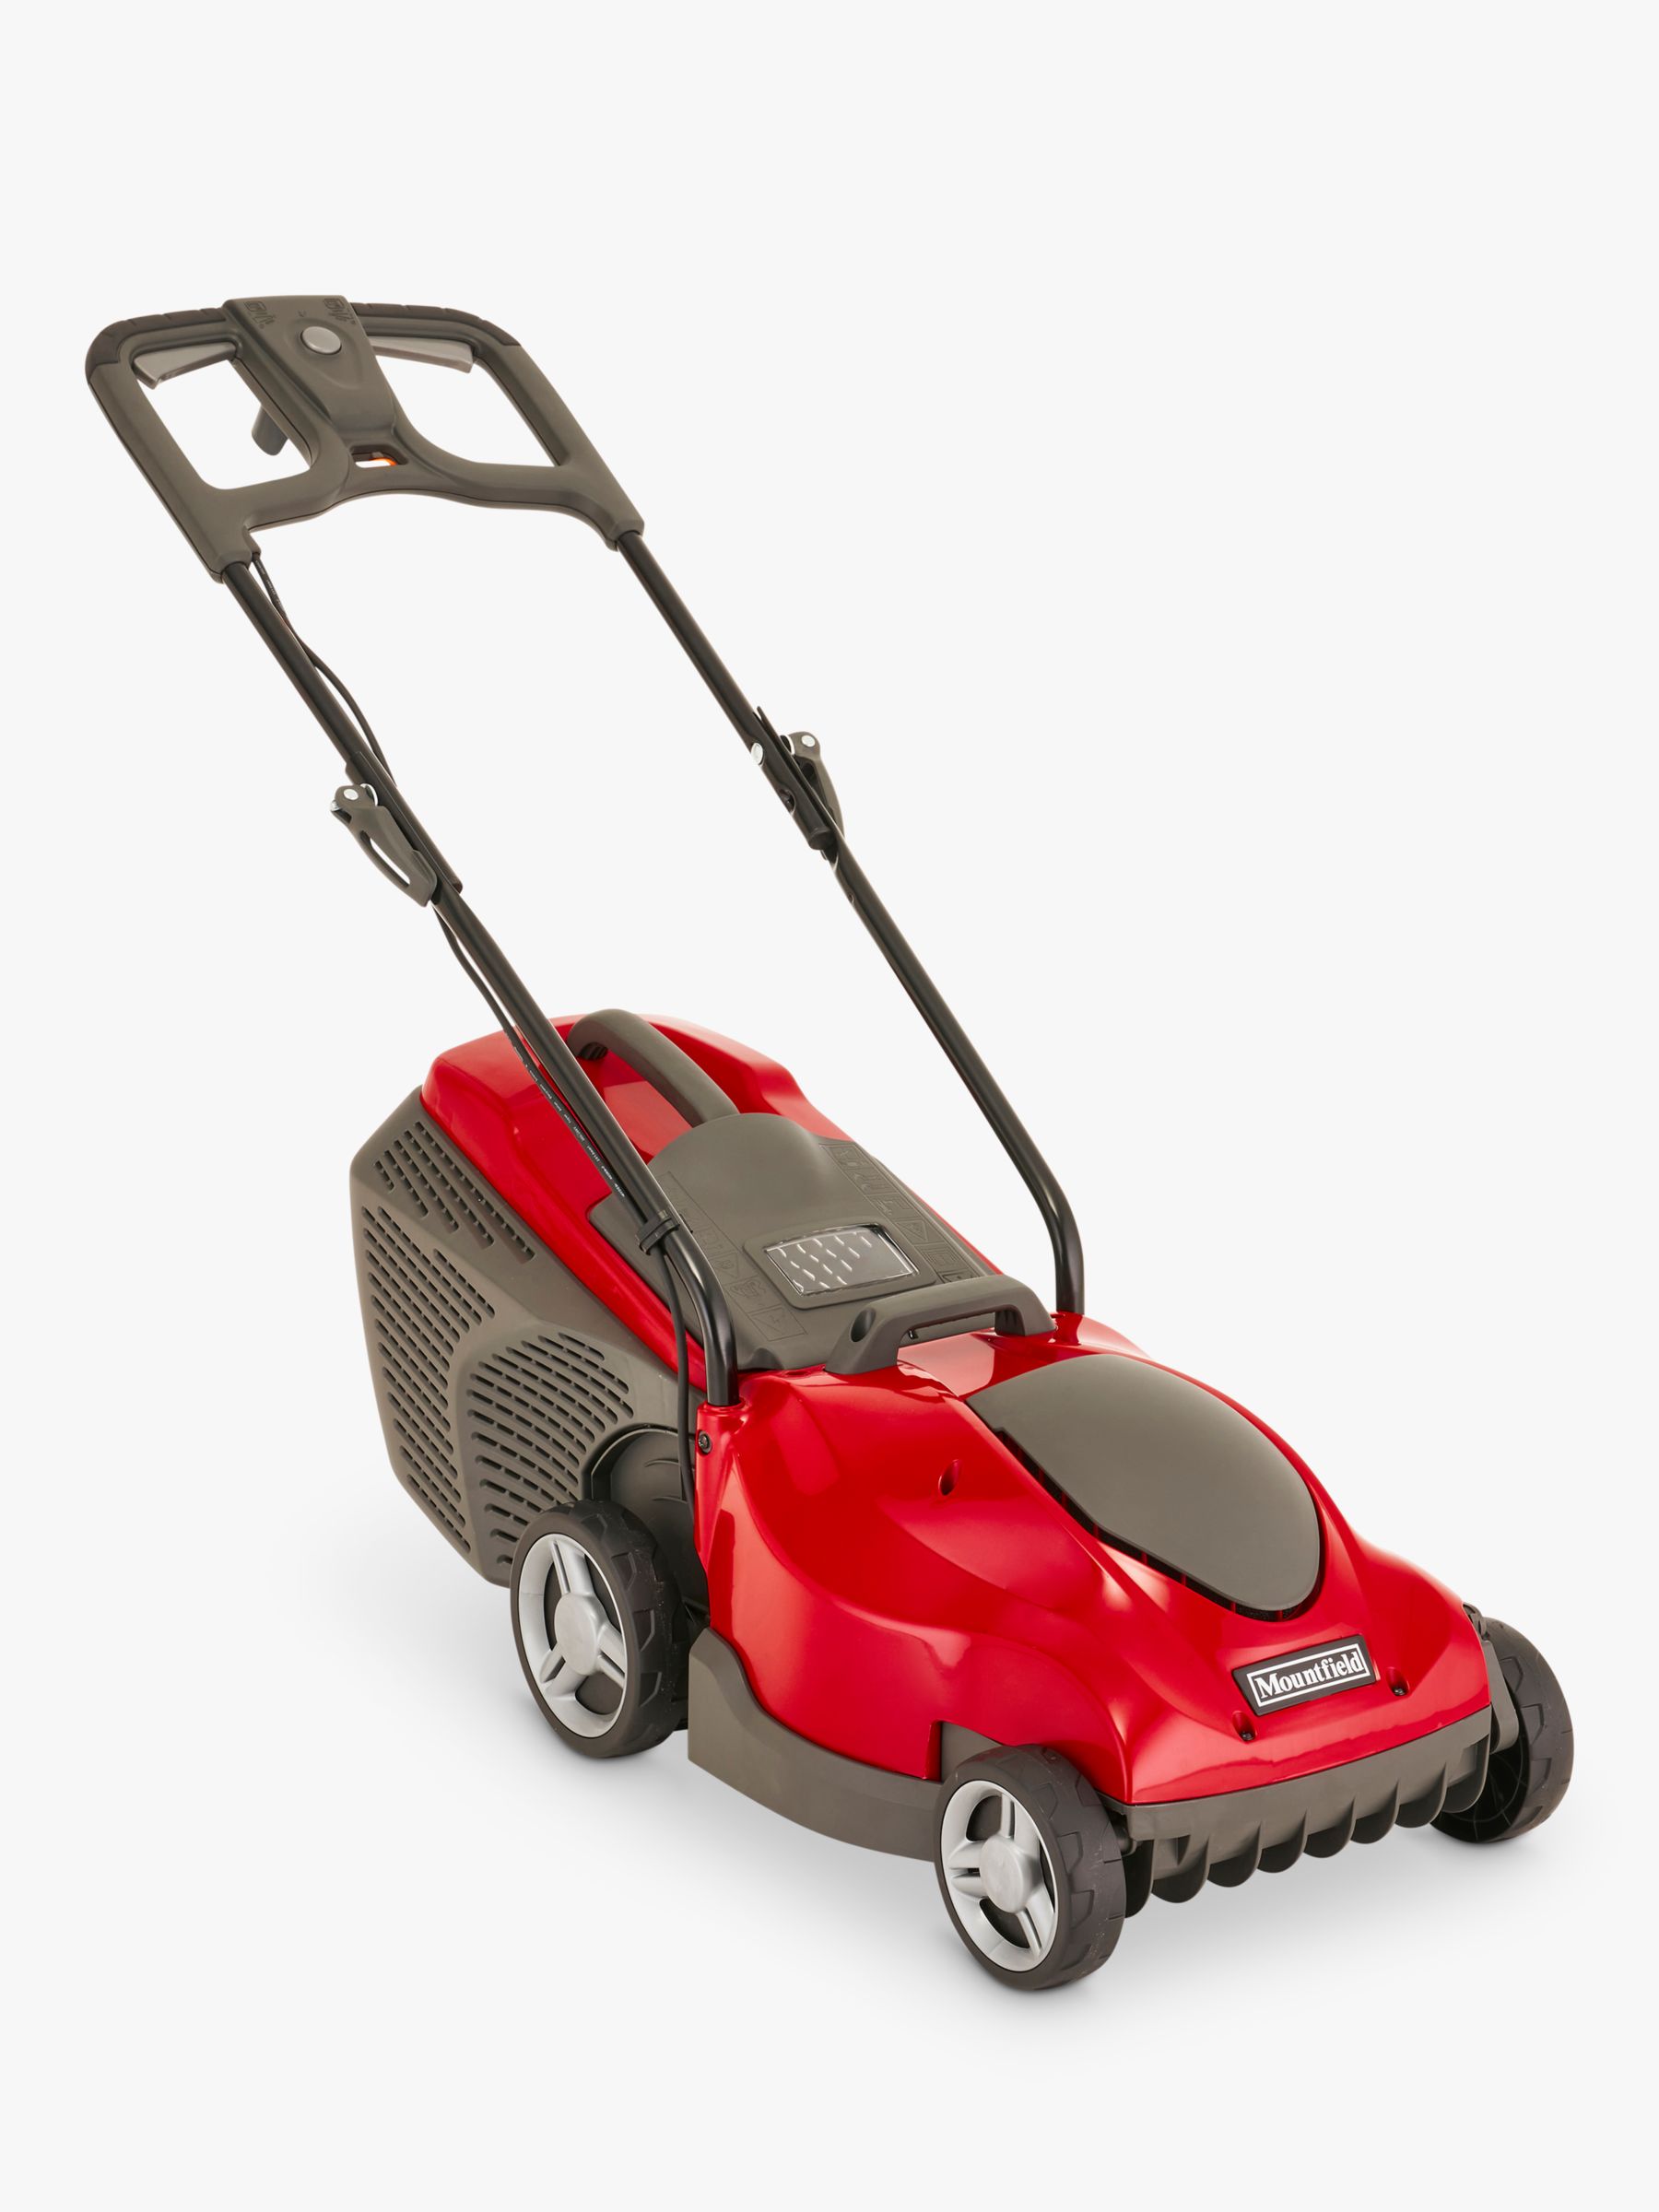 Mountfield Princess 34 Corded Electric Lawn Mower At John Lewis And Partners